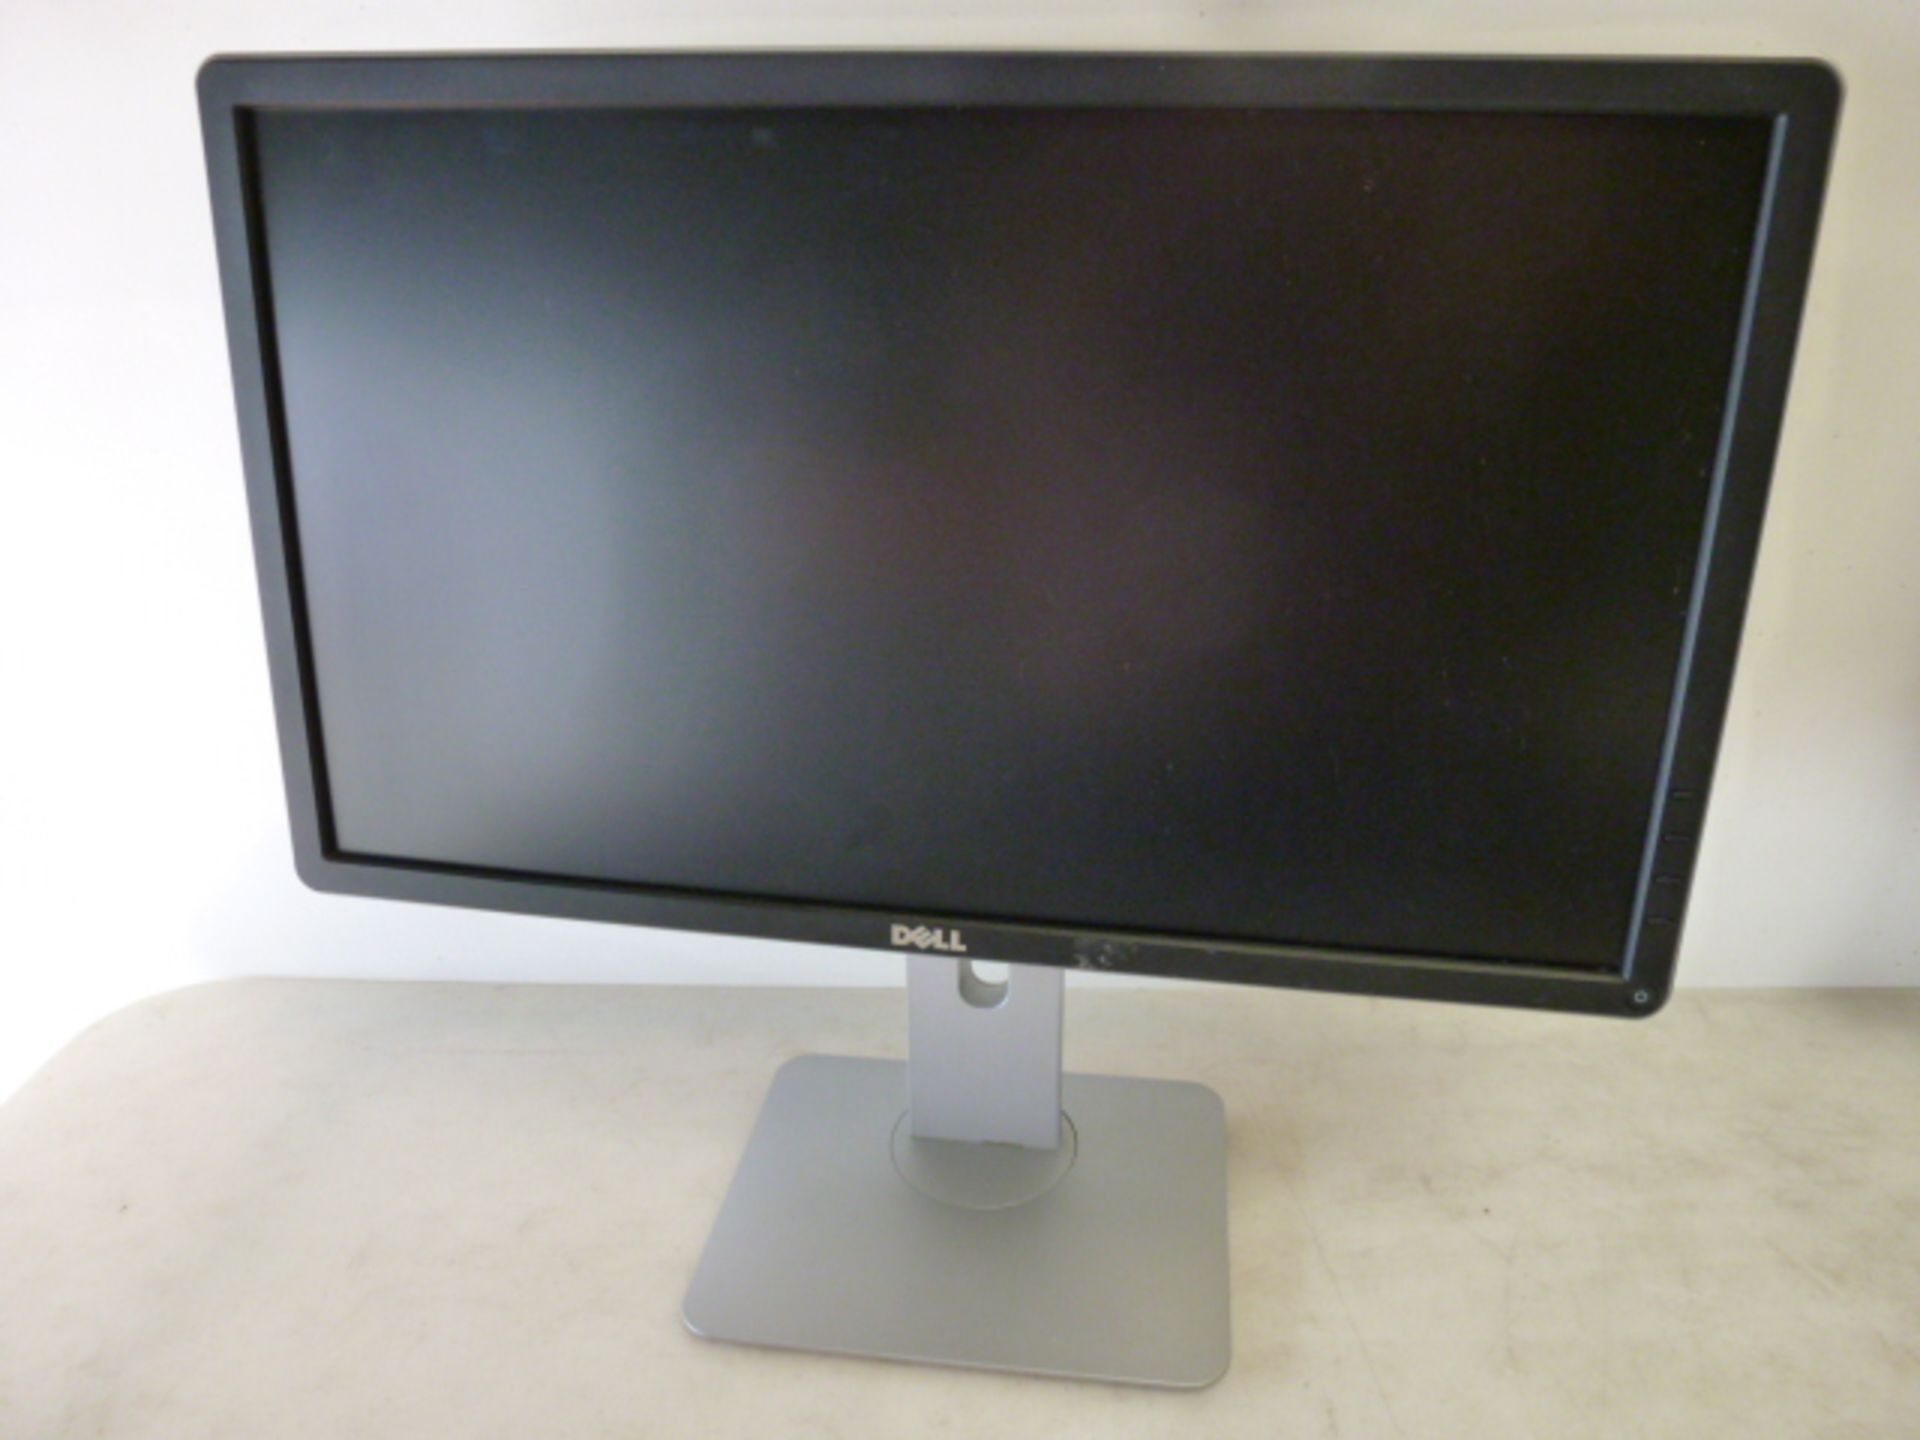 Dell 22" Widescreen LCD Monitor Model P2214Hb. Comes with Power Supply & VGA